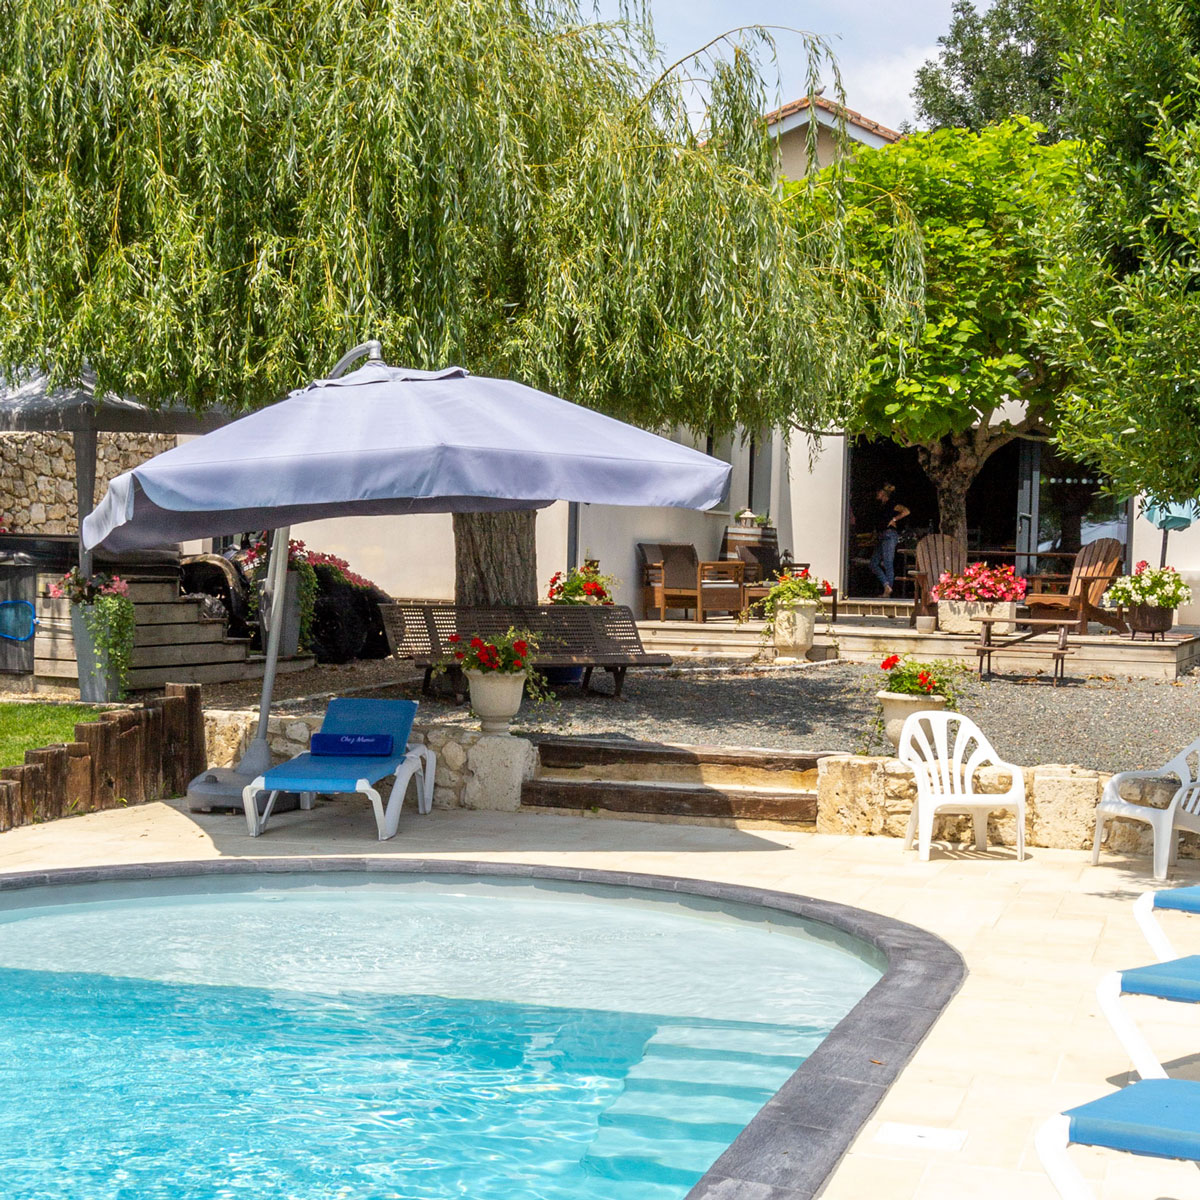 Chez Mamie holiday villa in Monbazillac Bergerac sw France with a Heated-pool, hot tub and vineyard views